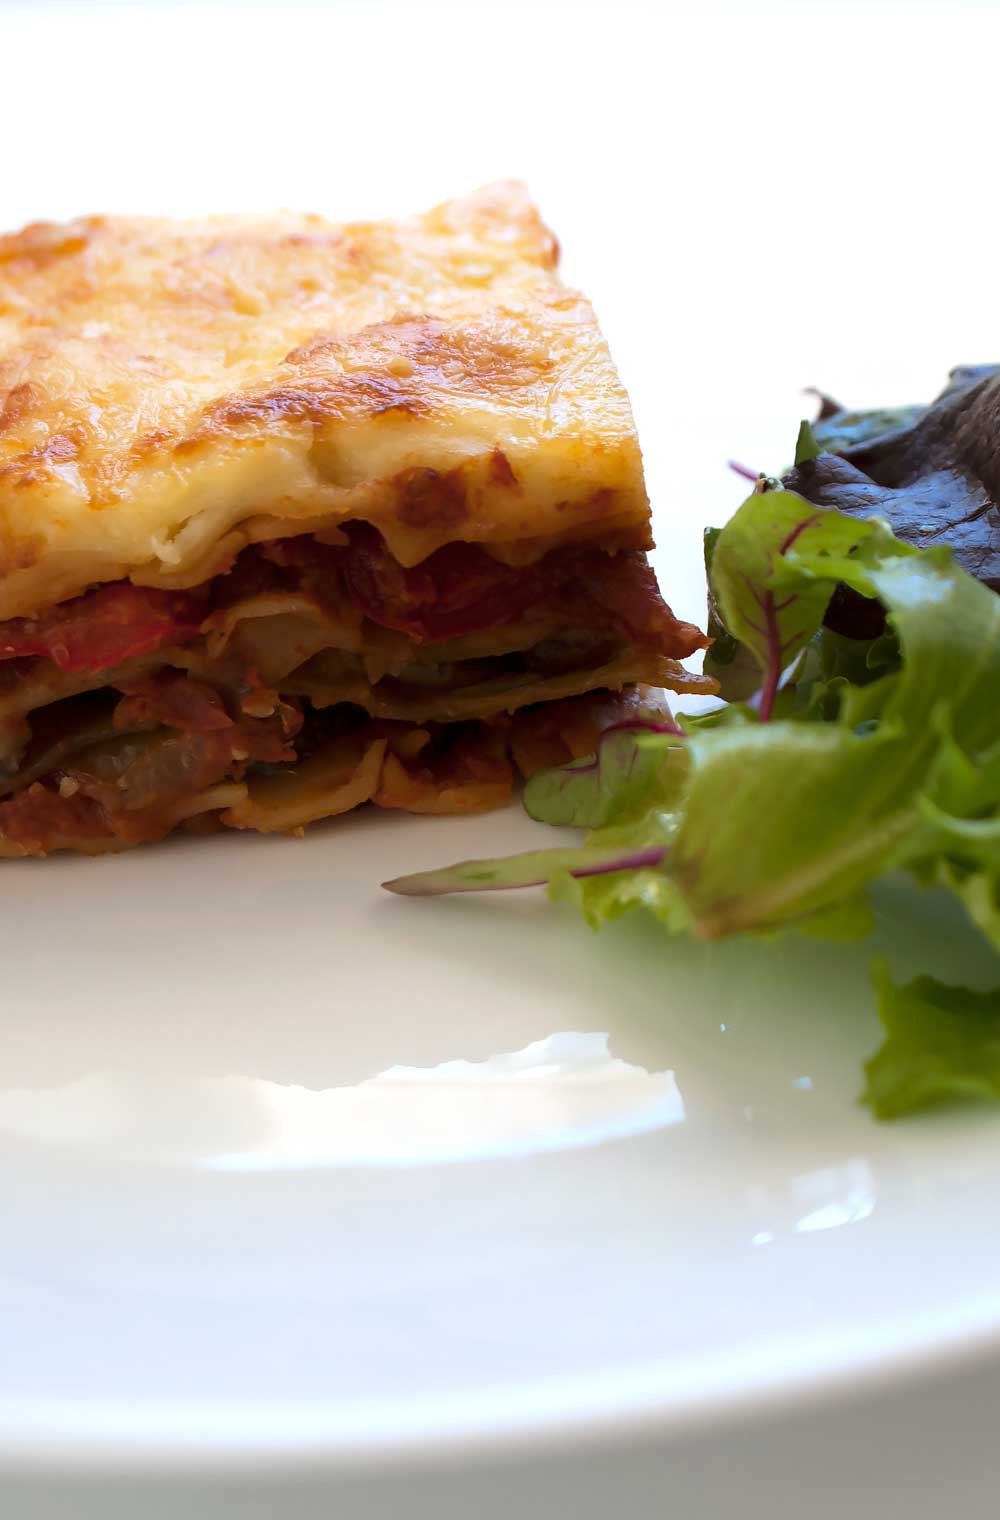 Chargrilled Vegetable Lasagne. A delicious vegetarian lasagne recipe, packed full of roasted capsicums, zucchinis and mushrooms. This dish can be prepared ahead of time making it ideal for casual entertaining.